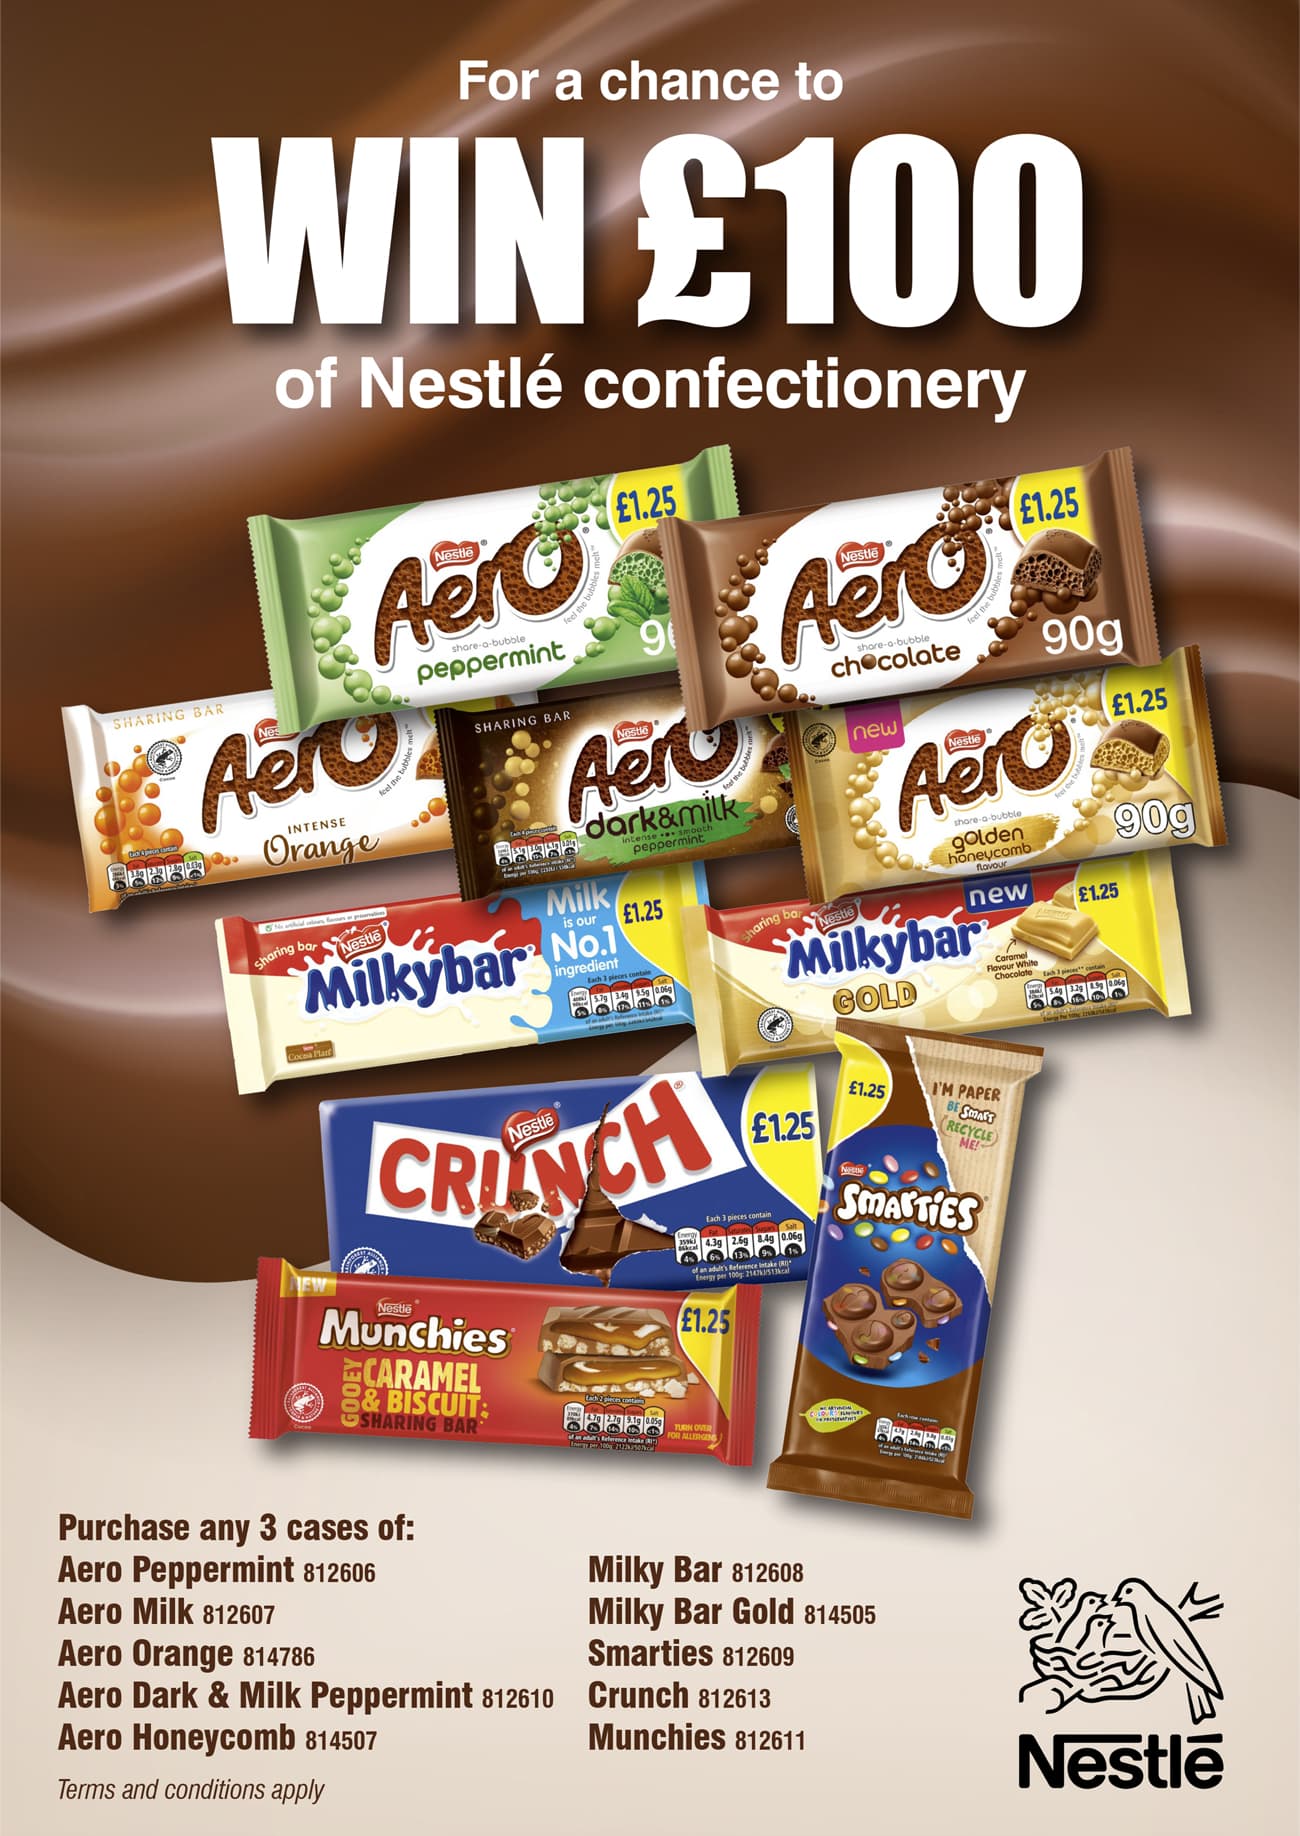 A chance to win £100 of Nestle confectionery